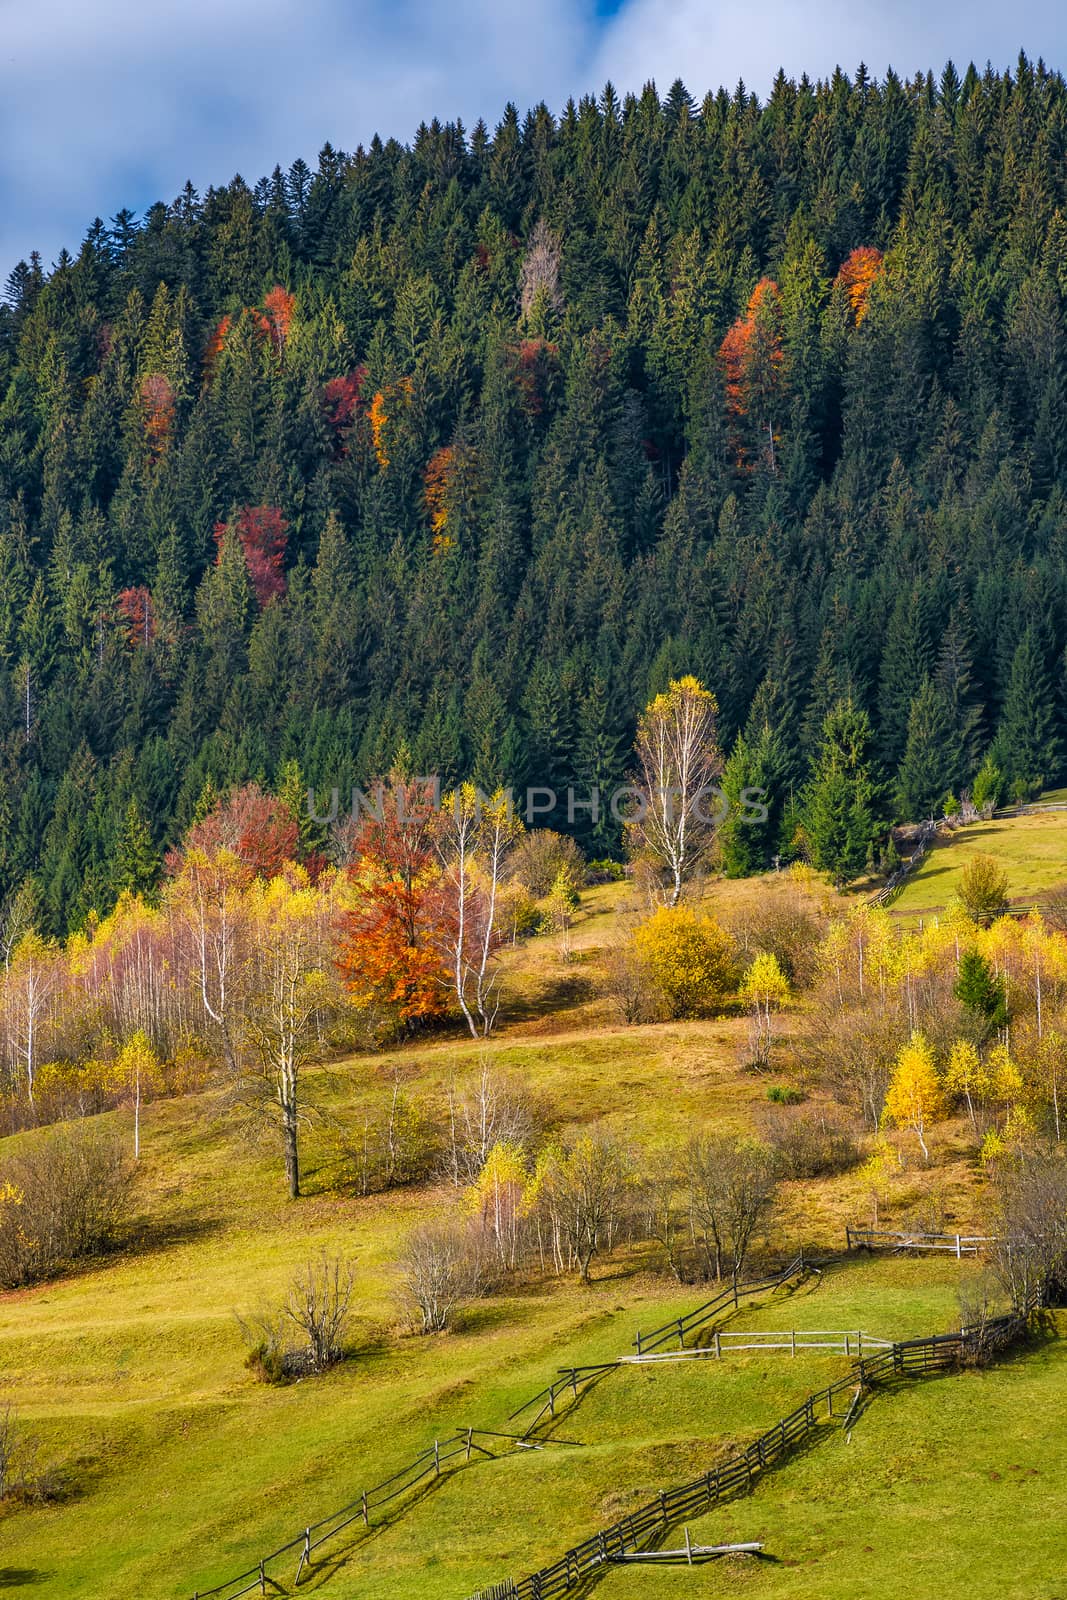 agricultural fields on hillside near forest. lovely autumnal scenery in mountains